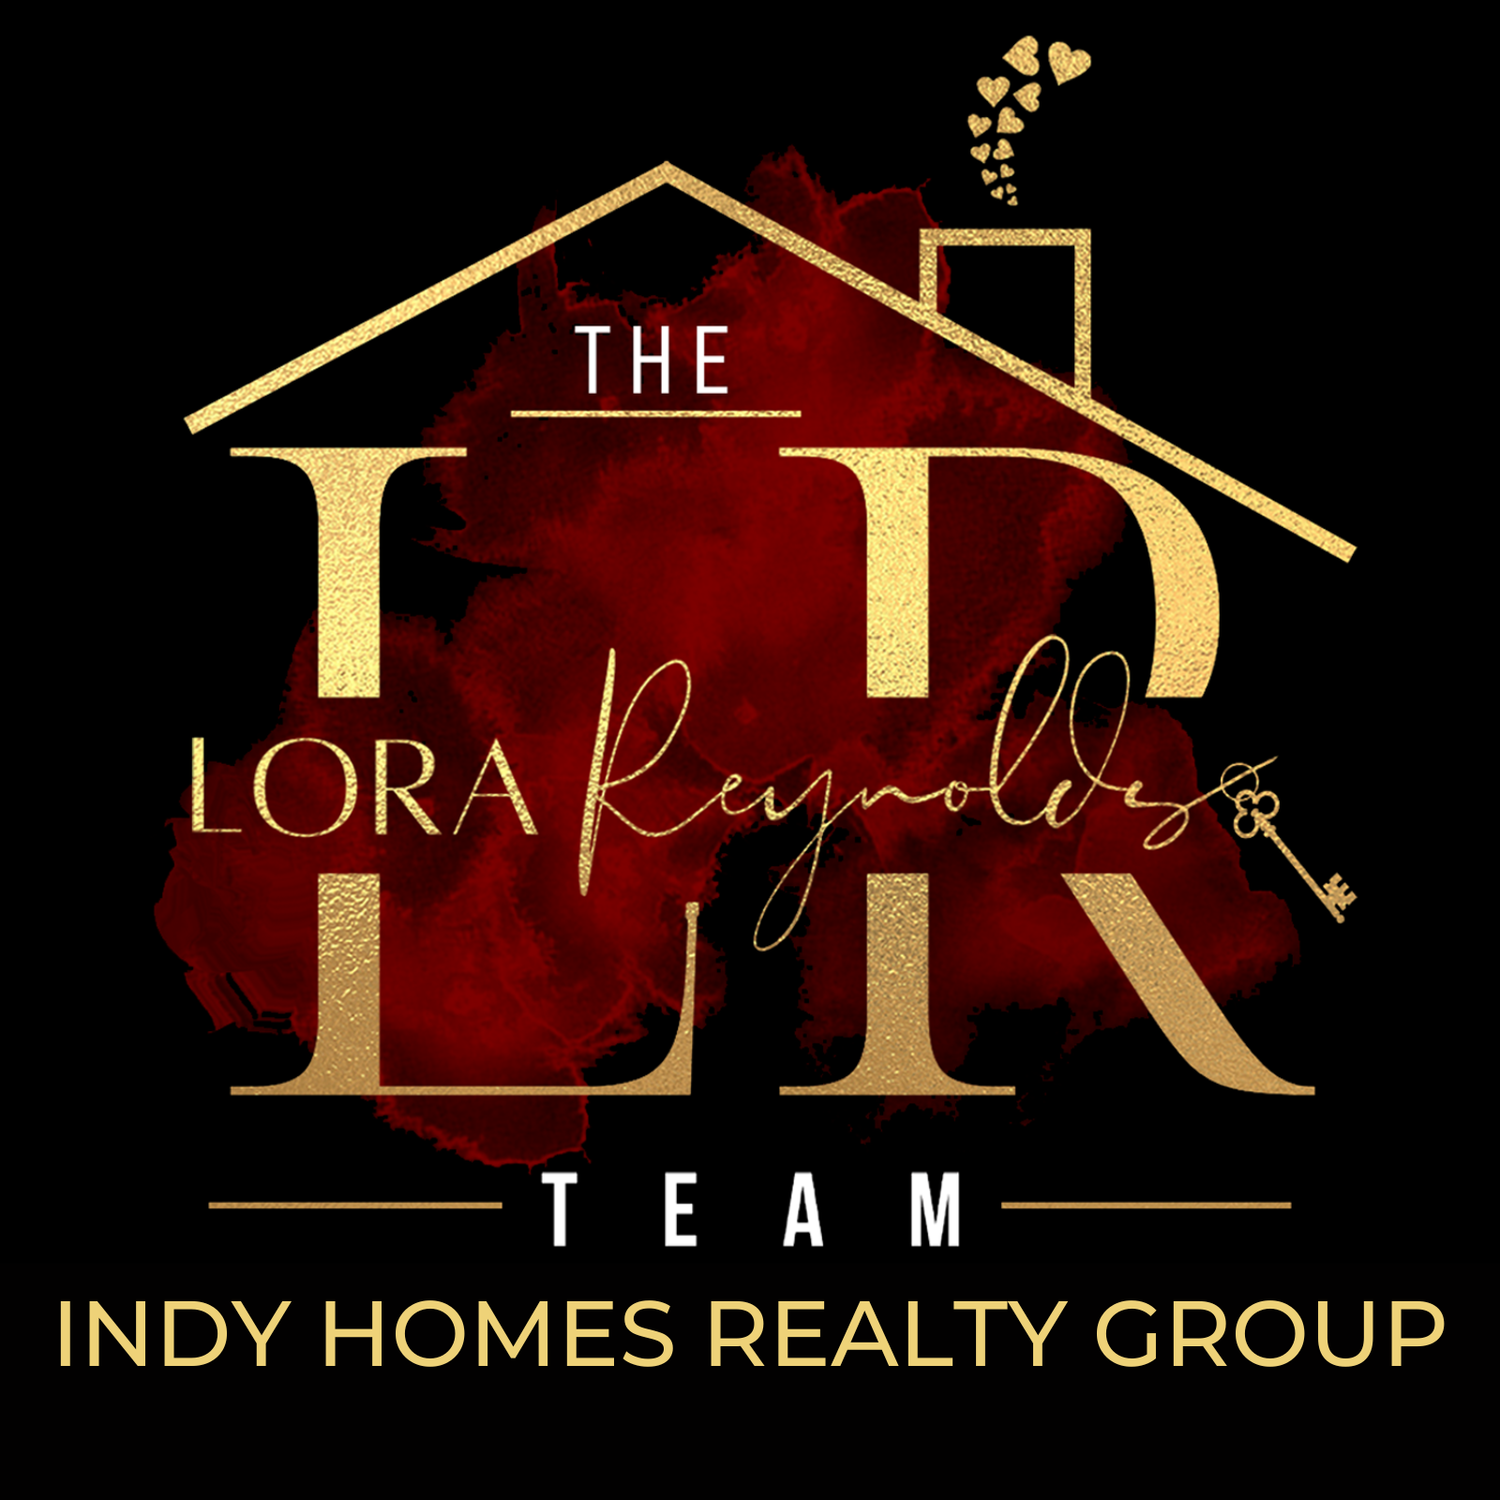 The Lora Reynolds Team, Indy Homes Realty Group